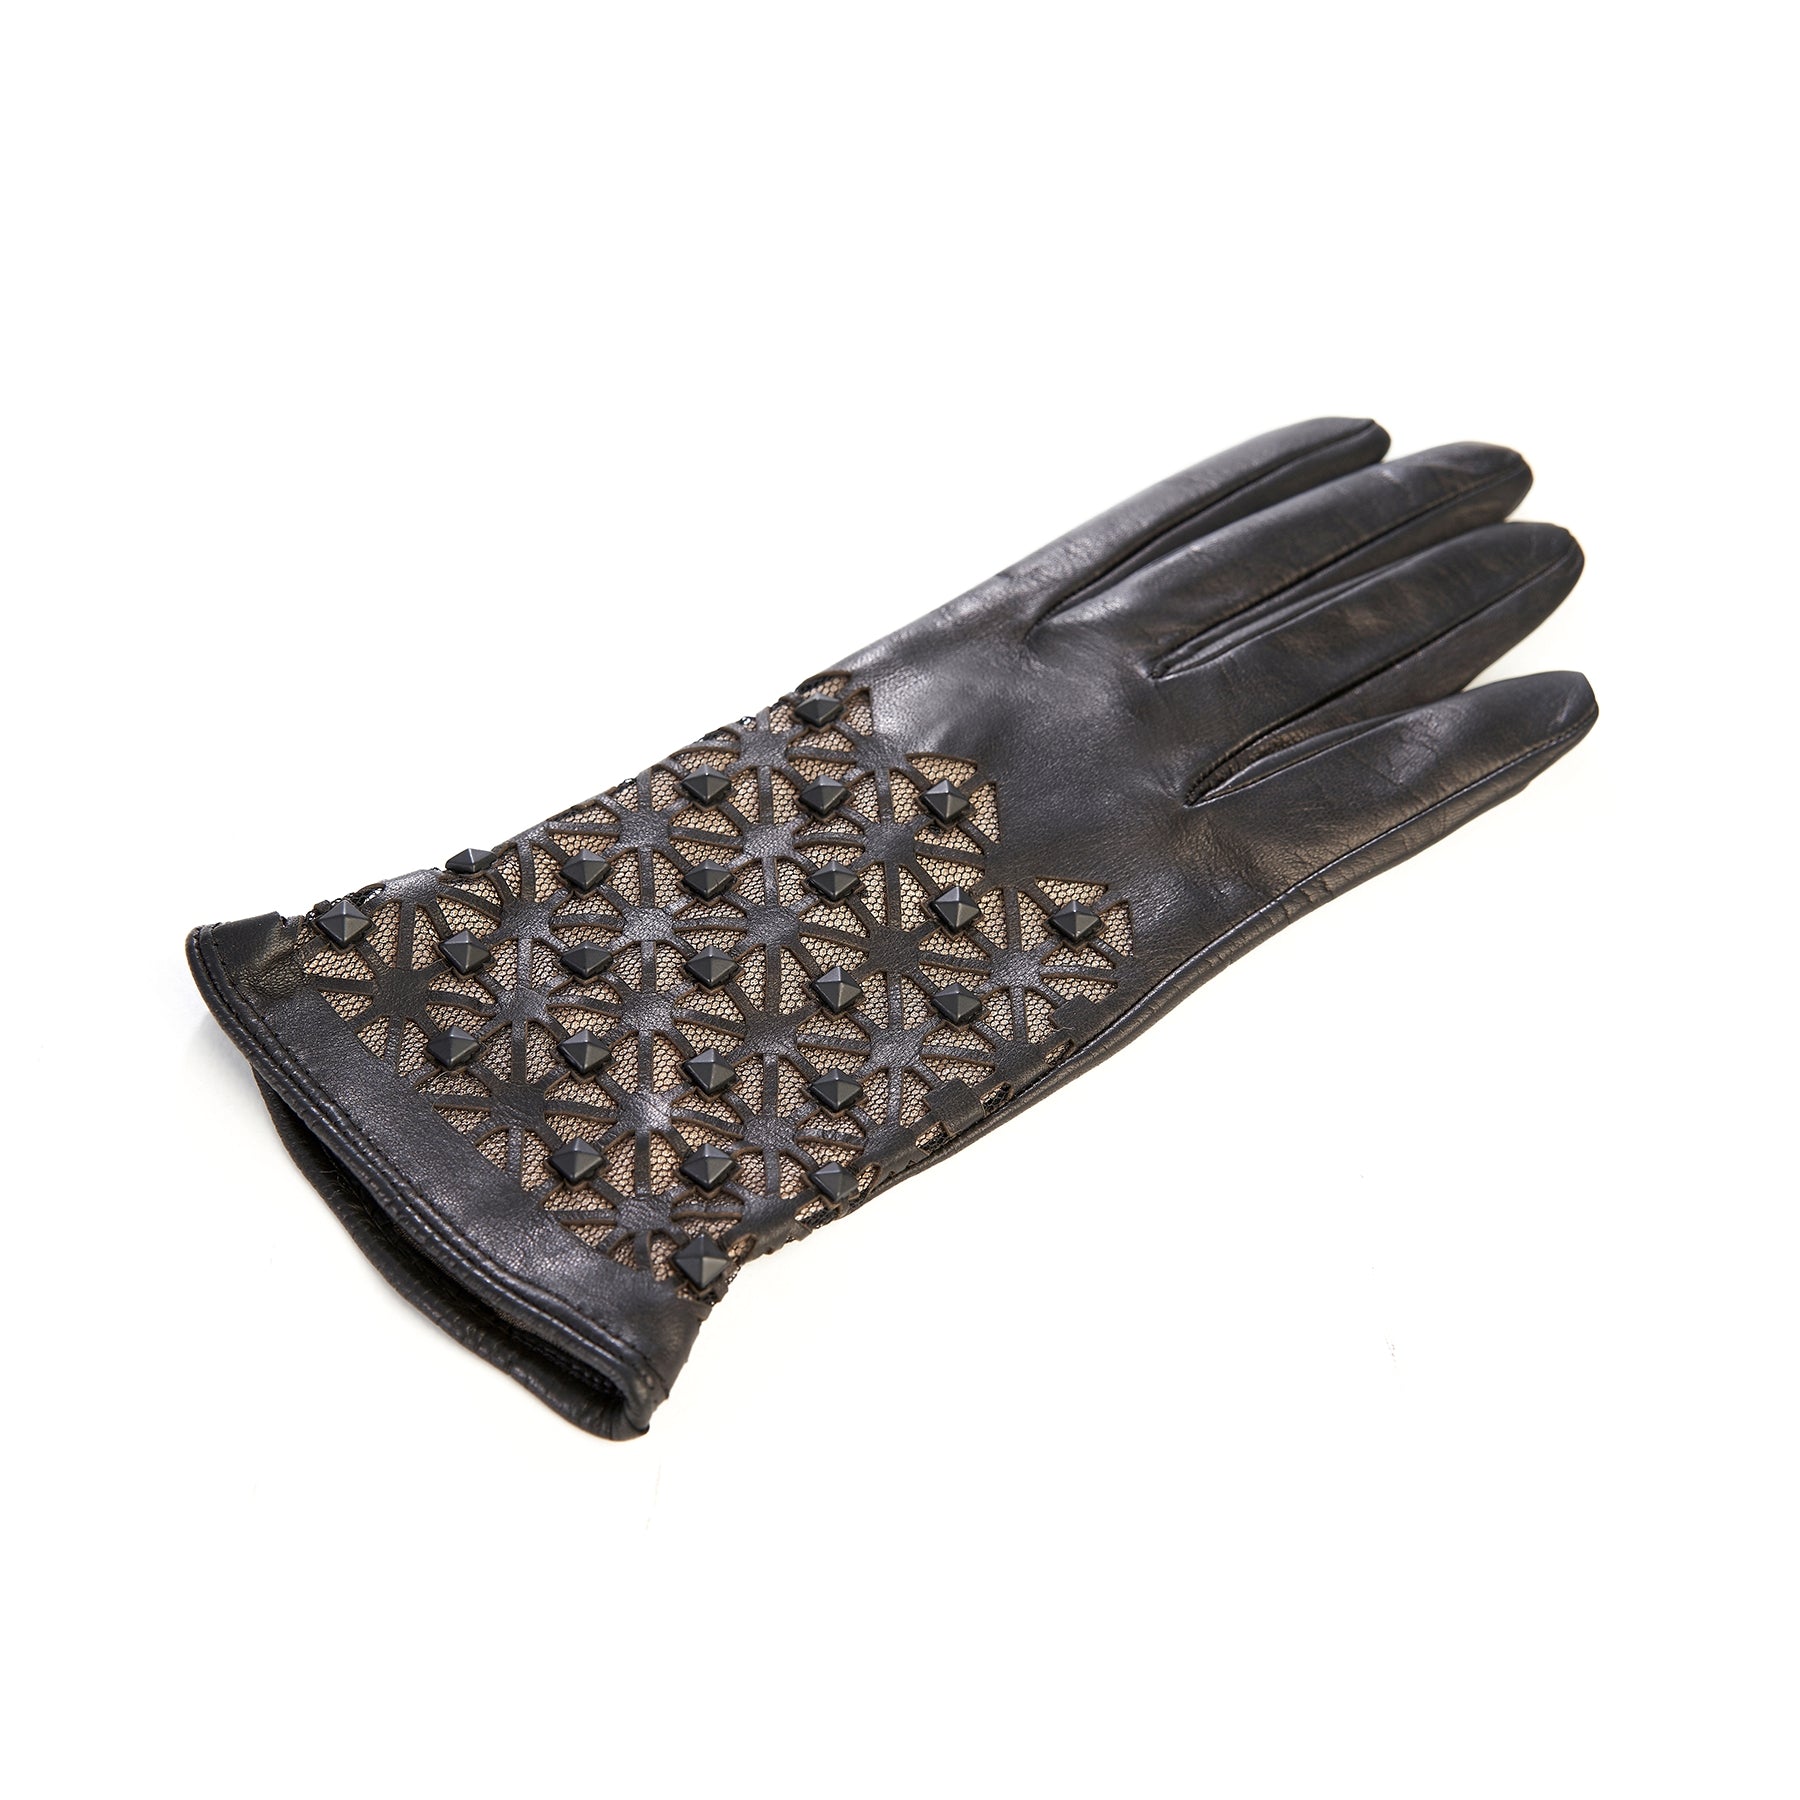 Women's black leather gloves with studs silk lined